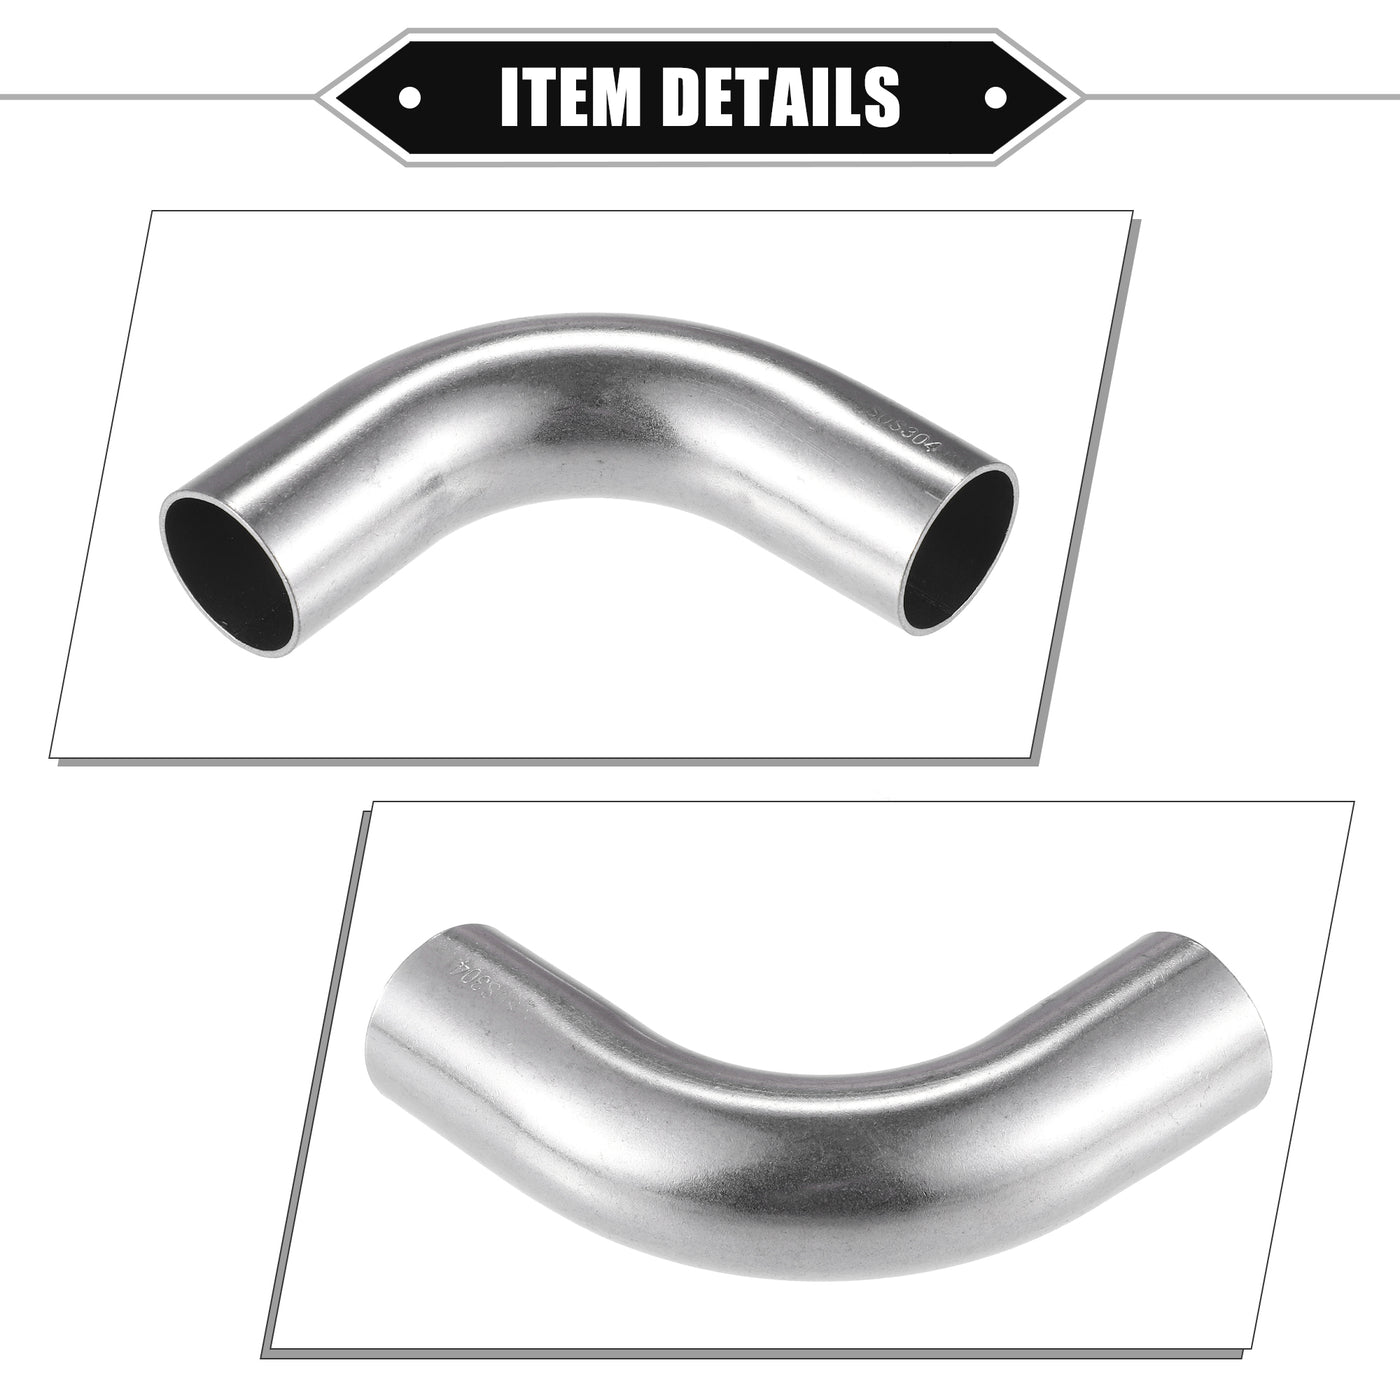 VekAuto 2 Pcs Bend Elbow Pipe Tube, 1.25" OD 4" Leg 90 Degree DIY Exhaust Pipe Intercooler Air Intake Tube Universal for Car Truck Automotive Durable 304 Stainless Steel Silver Tone